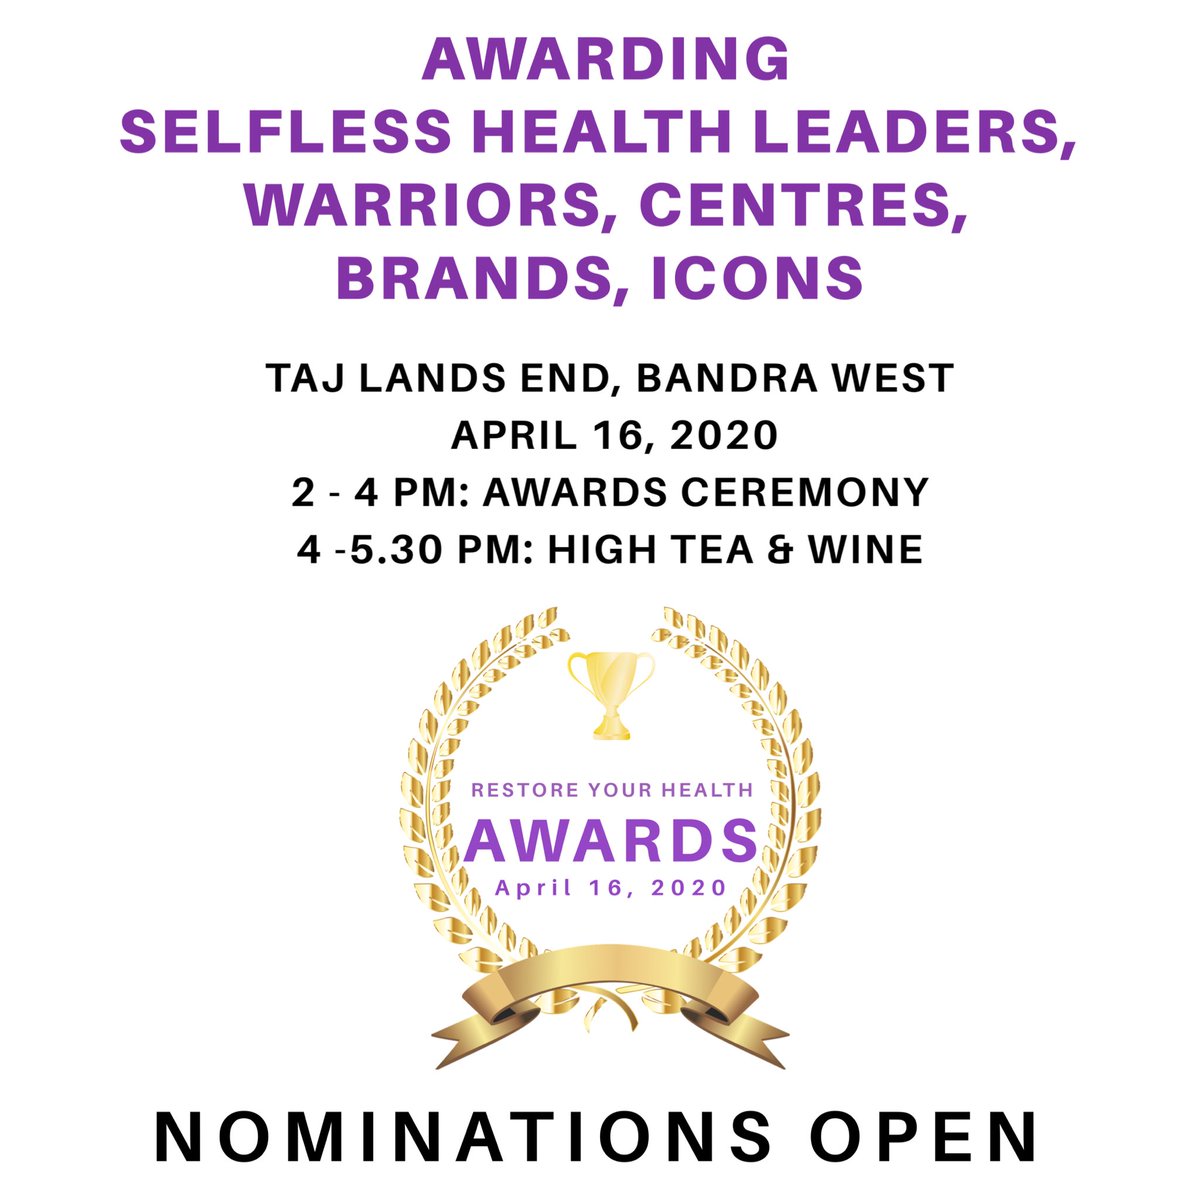 Looking forward to your registrations for nominations on rachnarestores.com

 #healer #nutritionist #healthcoach #Doctor #Ayurveda #yoga #dietician #alternativestyle #alternativehealer #rachnarestores #awards #healthawards #jury